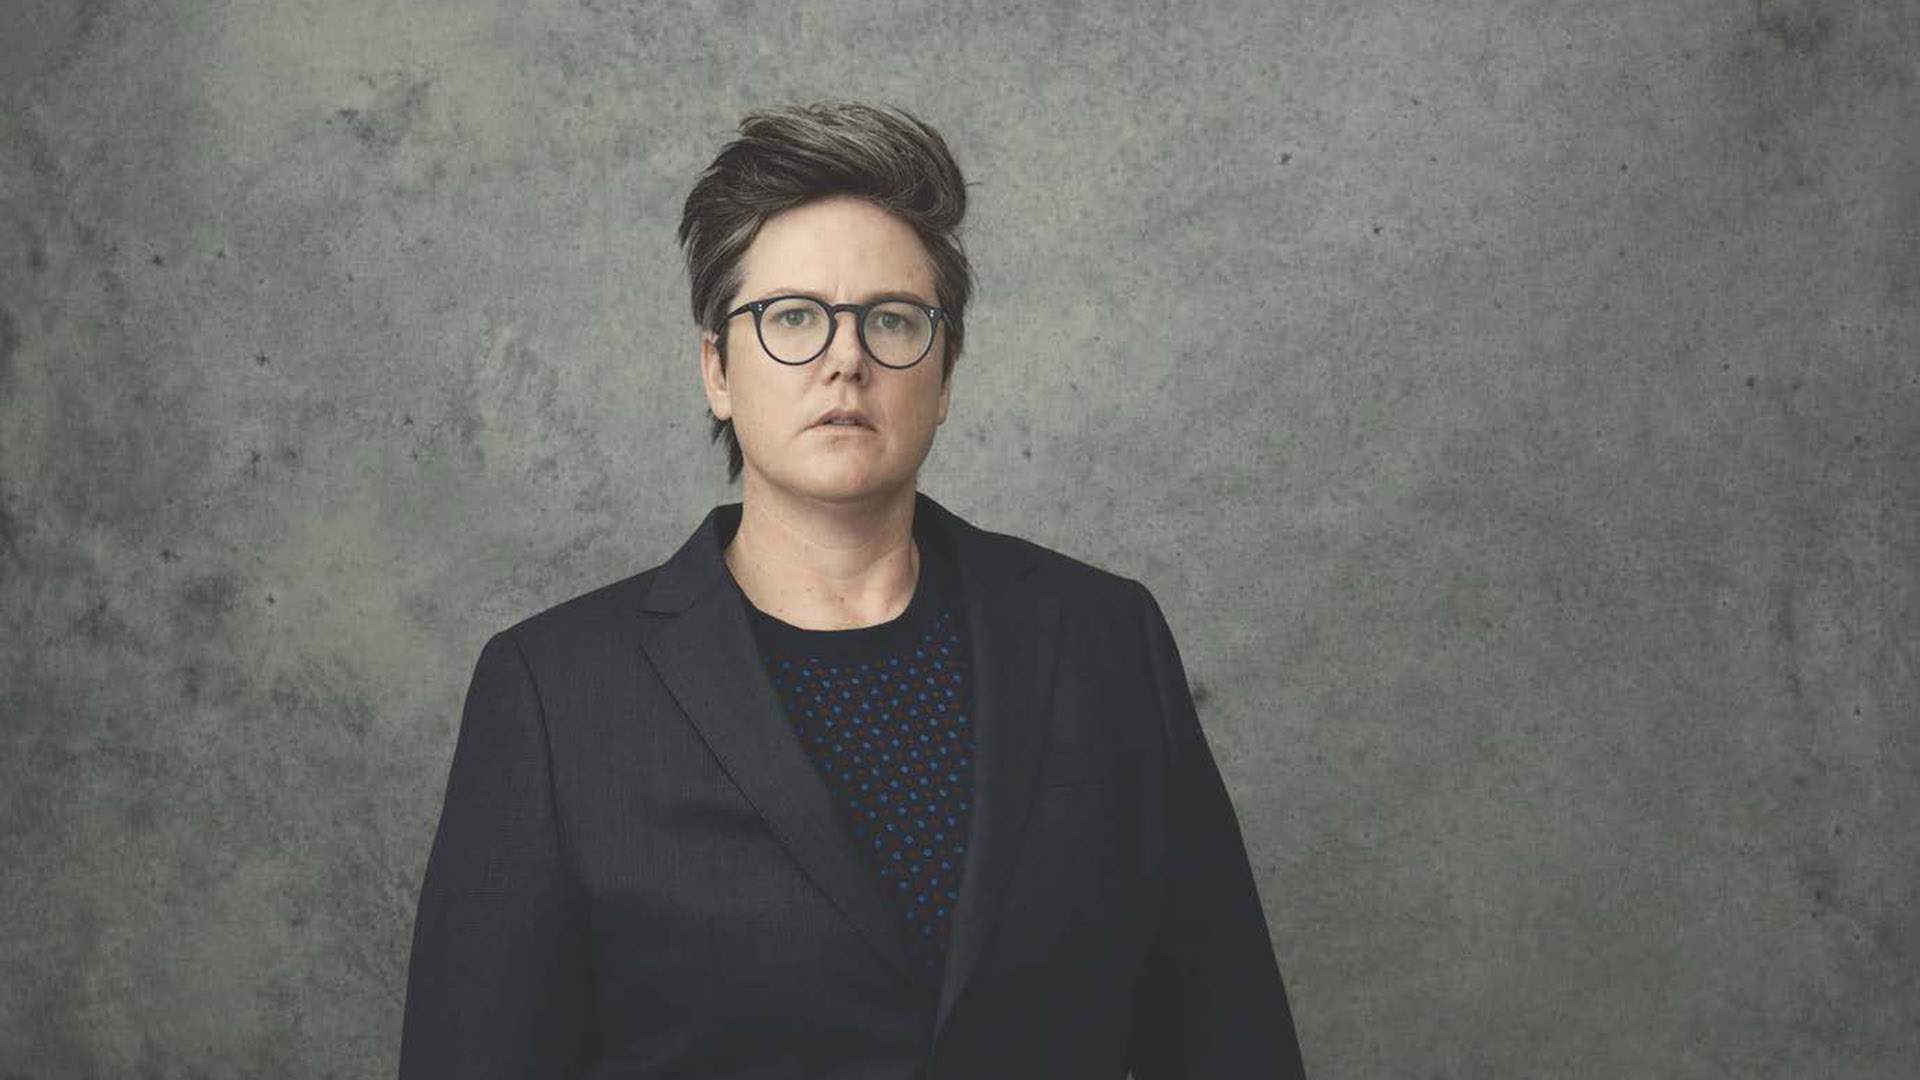 Hannah Gadsby's Latest Stand-Up Show 'Body of Work' Is Being Turned Into a Netflix Special